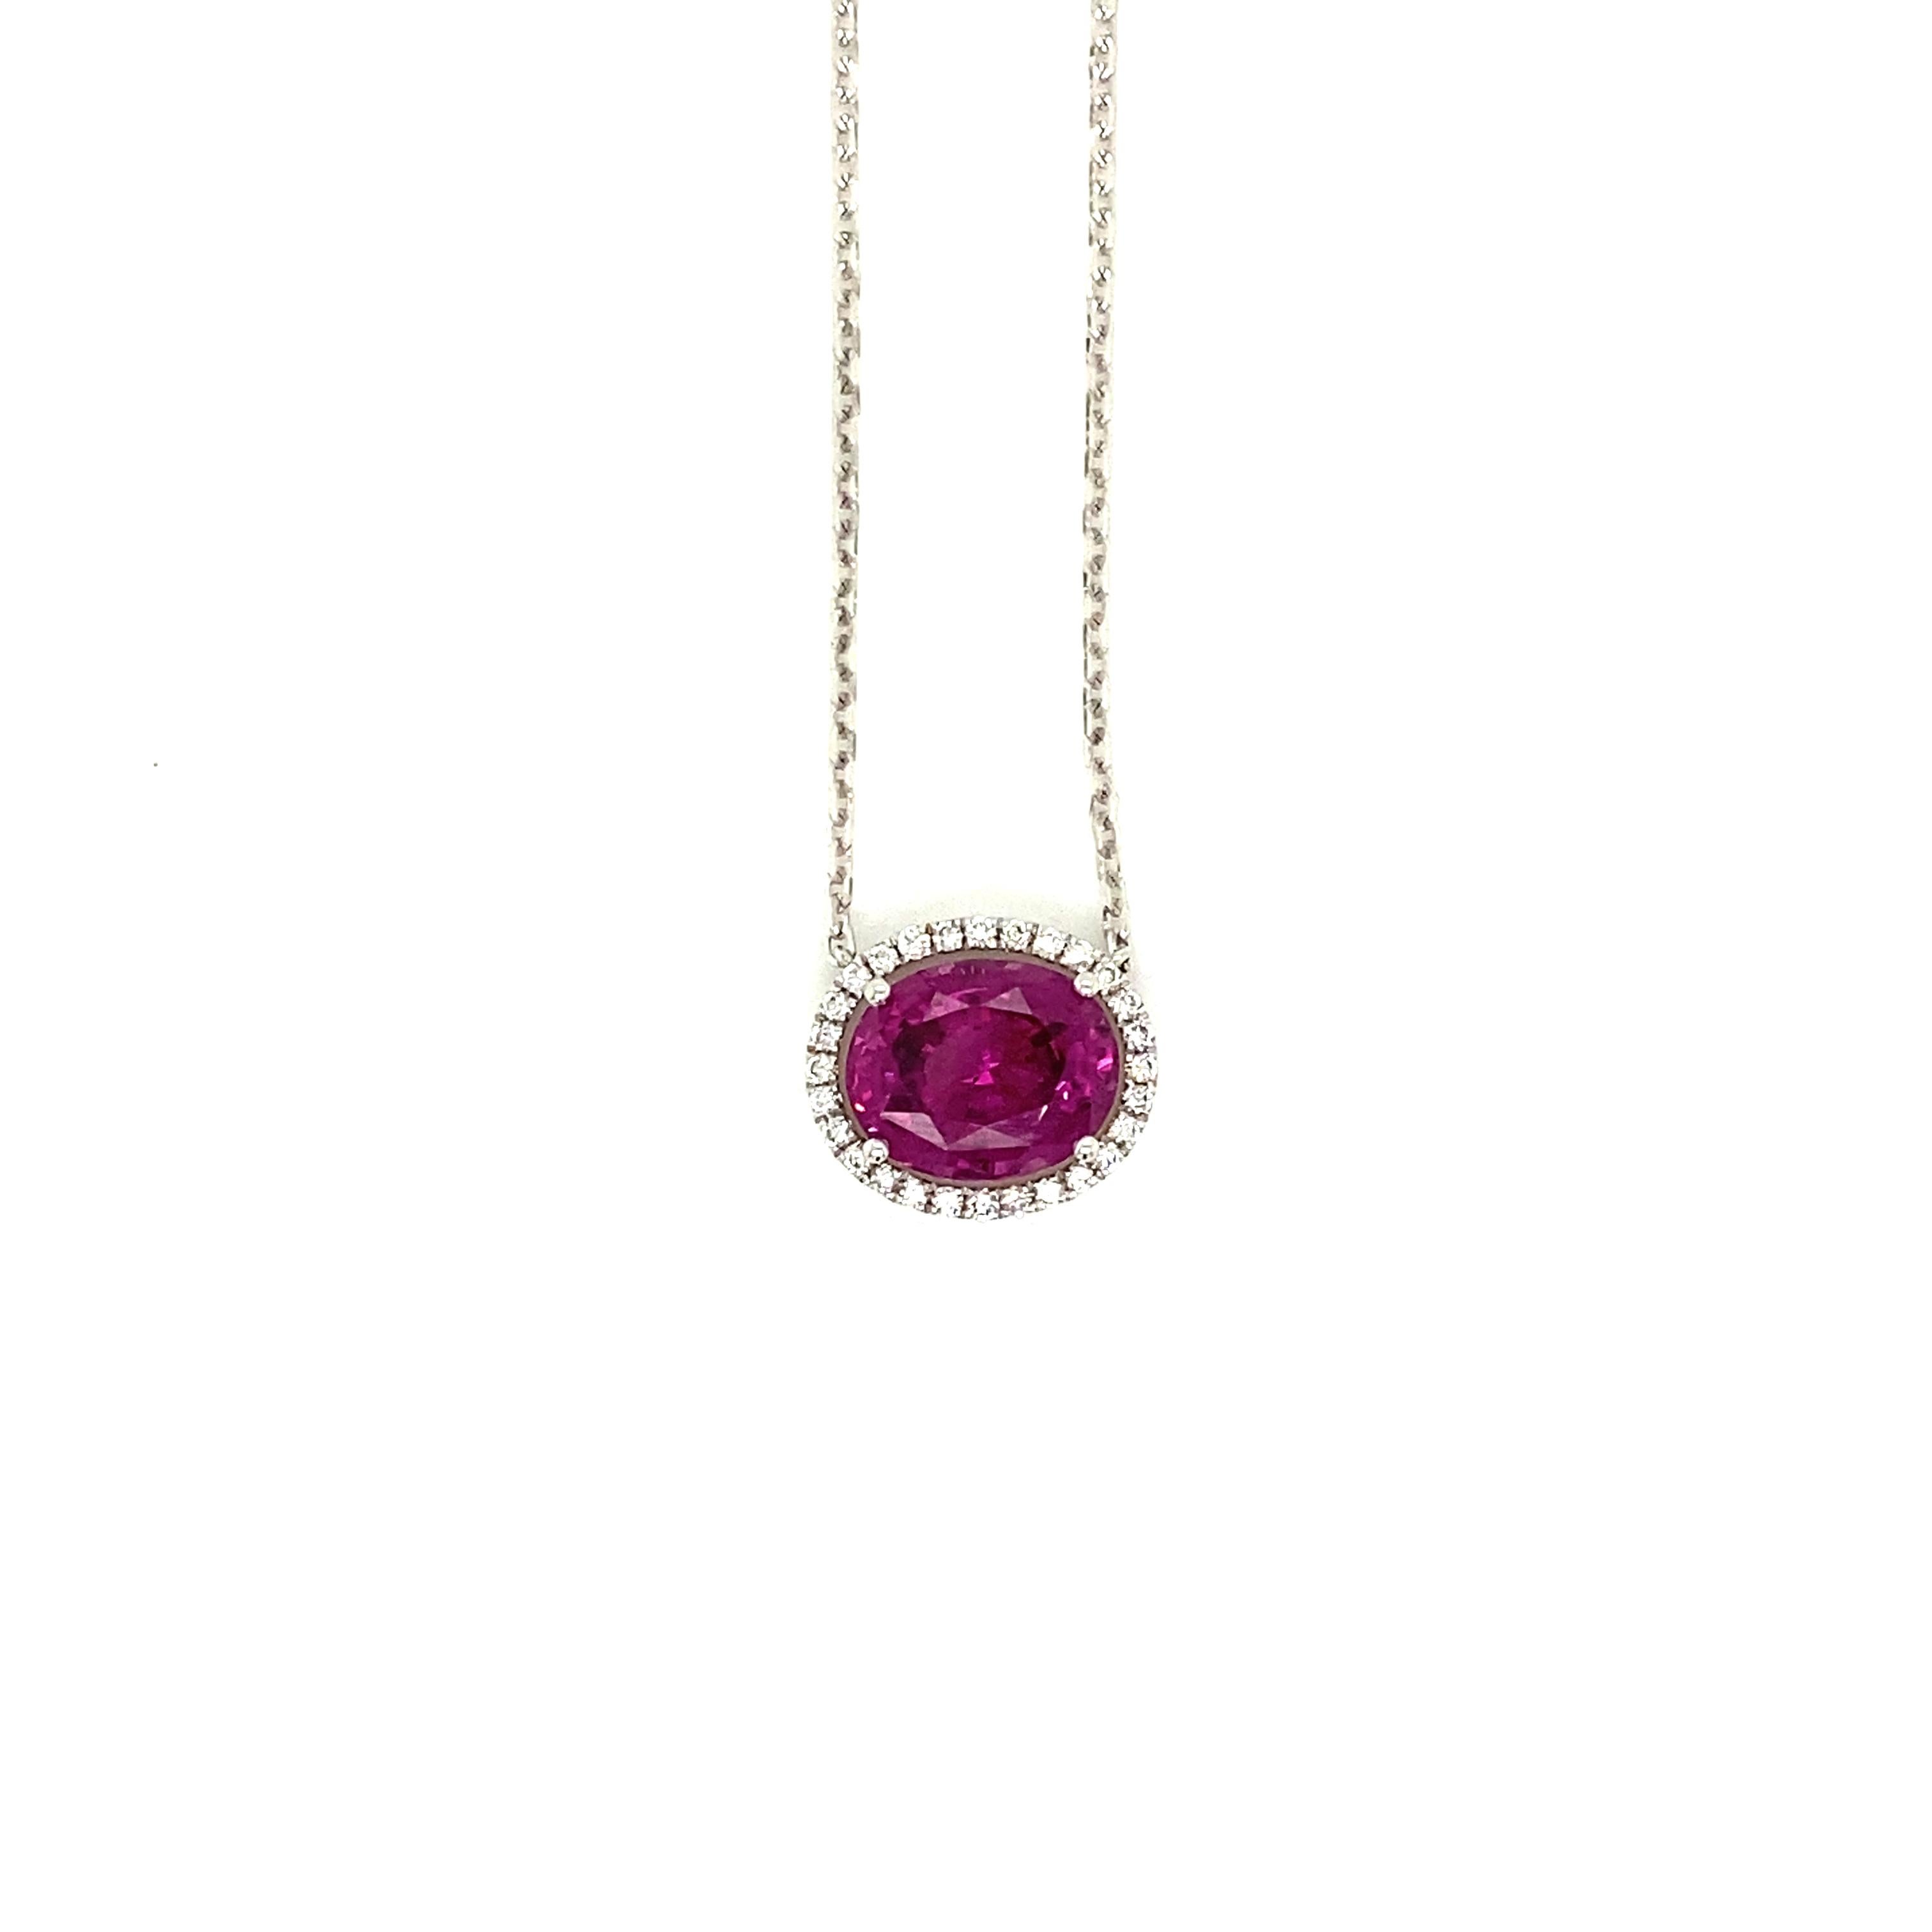 3.75Carat Pink-Purple Garnet and Diamond Pendant Necklace In New Condition For Sale In Hong Kong, HK